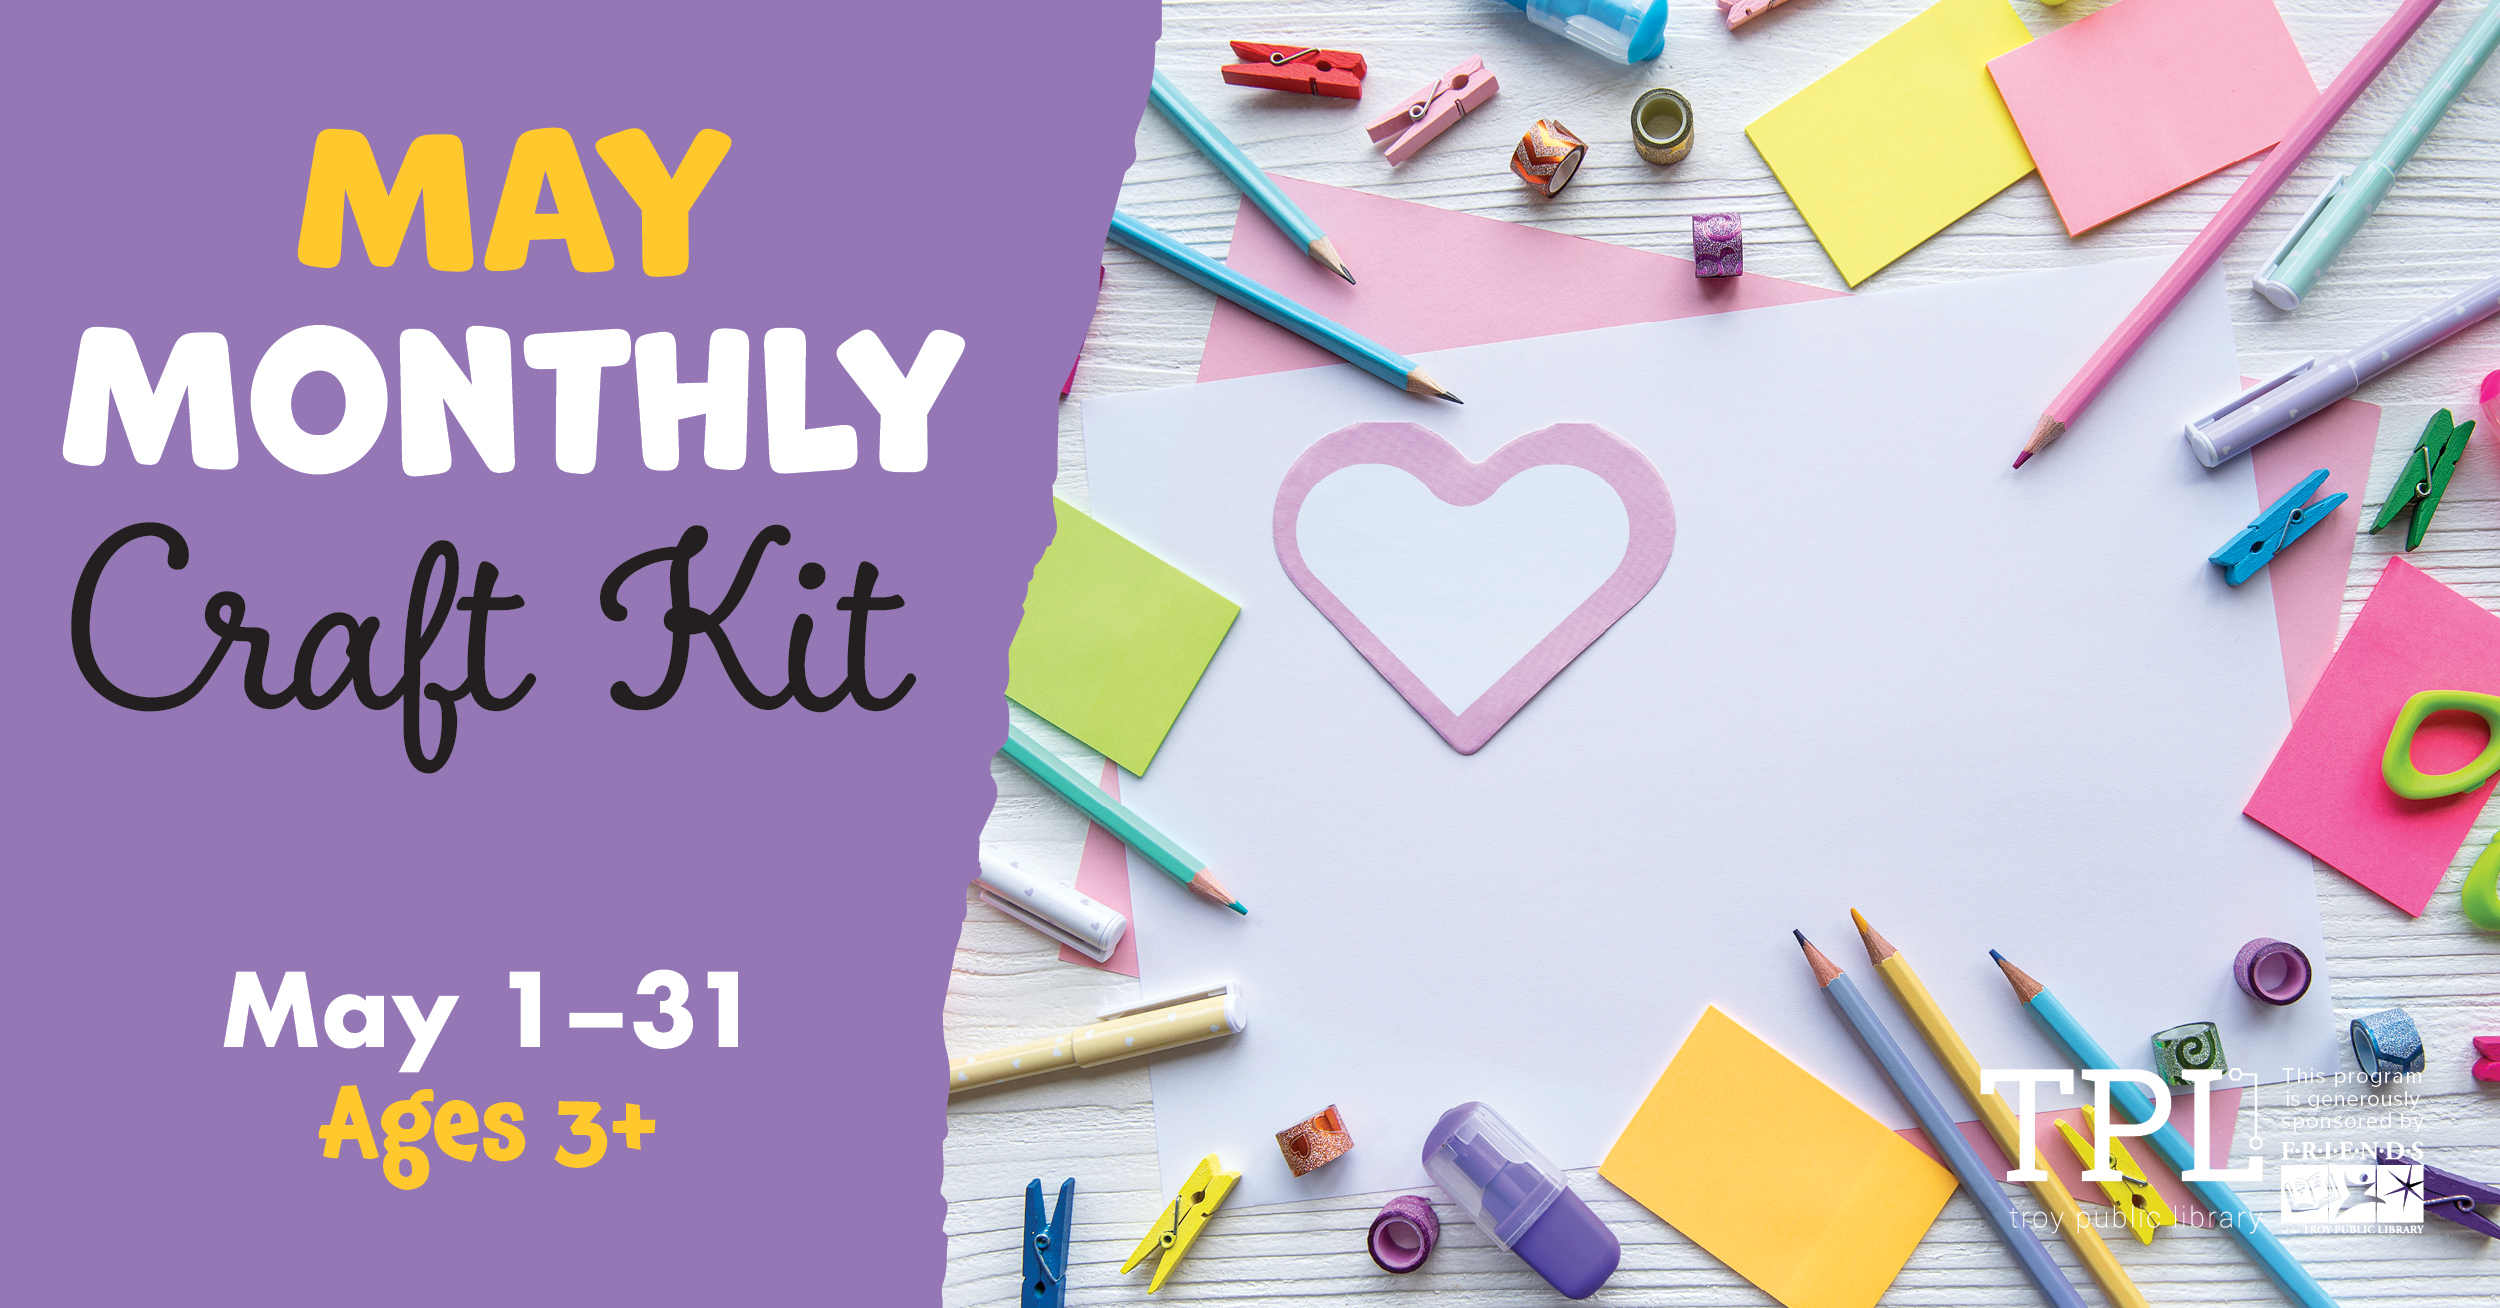 May Monthly Craft Kit May 1-31 Ages 3+. Sponsored by the Friends of the Troy Public Library